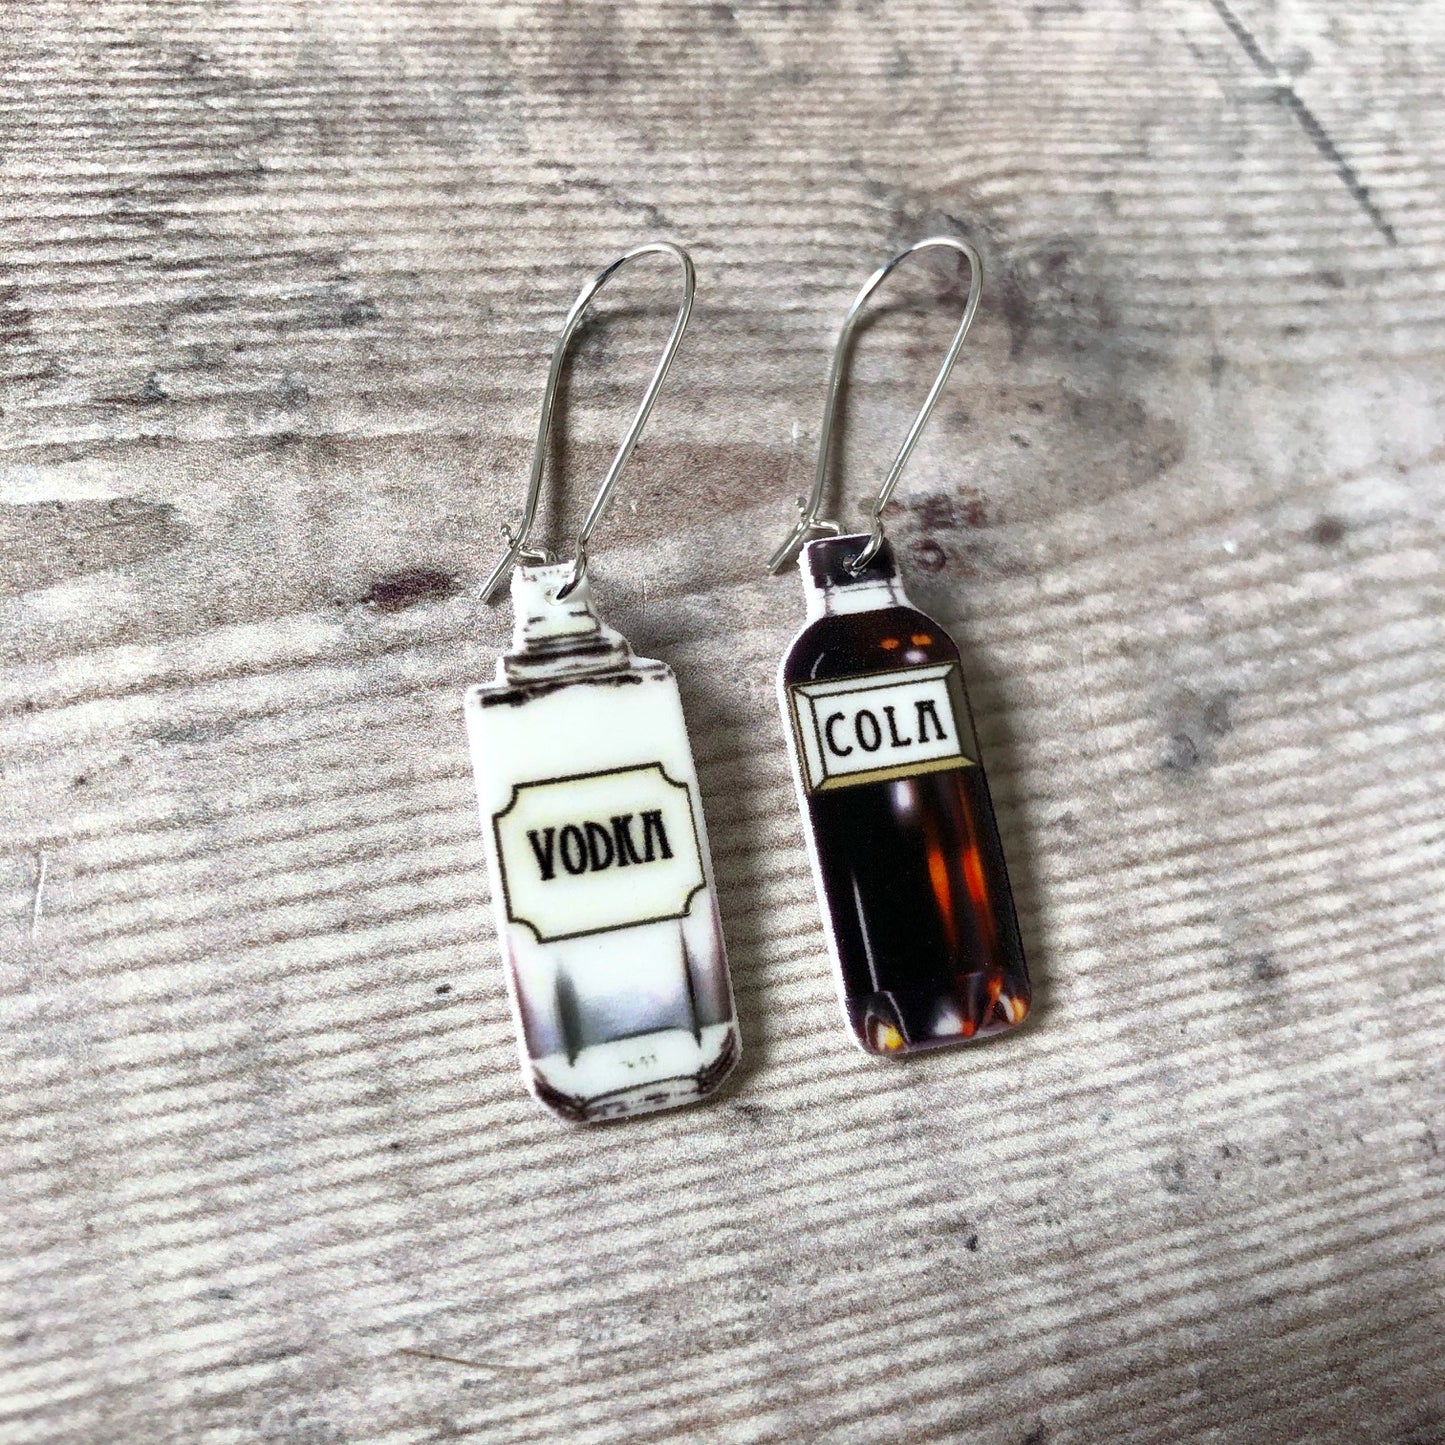 Vodka and cola bottle drop earrings - Quirky friend gift